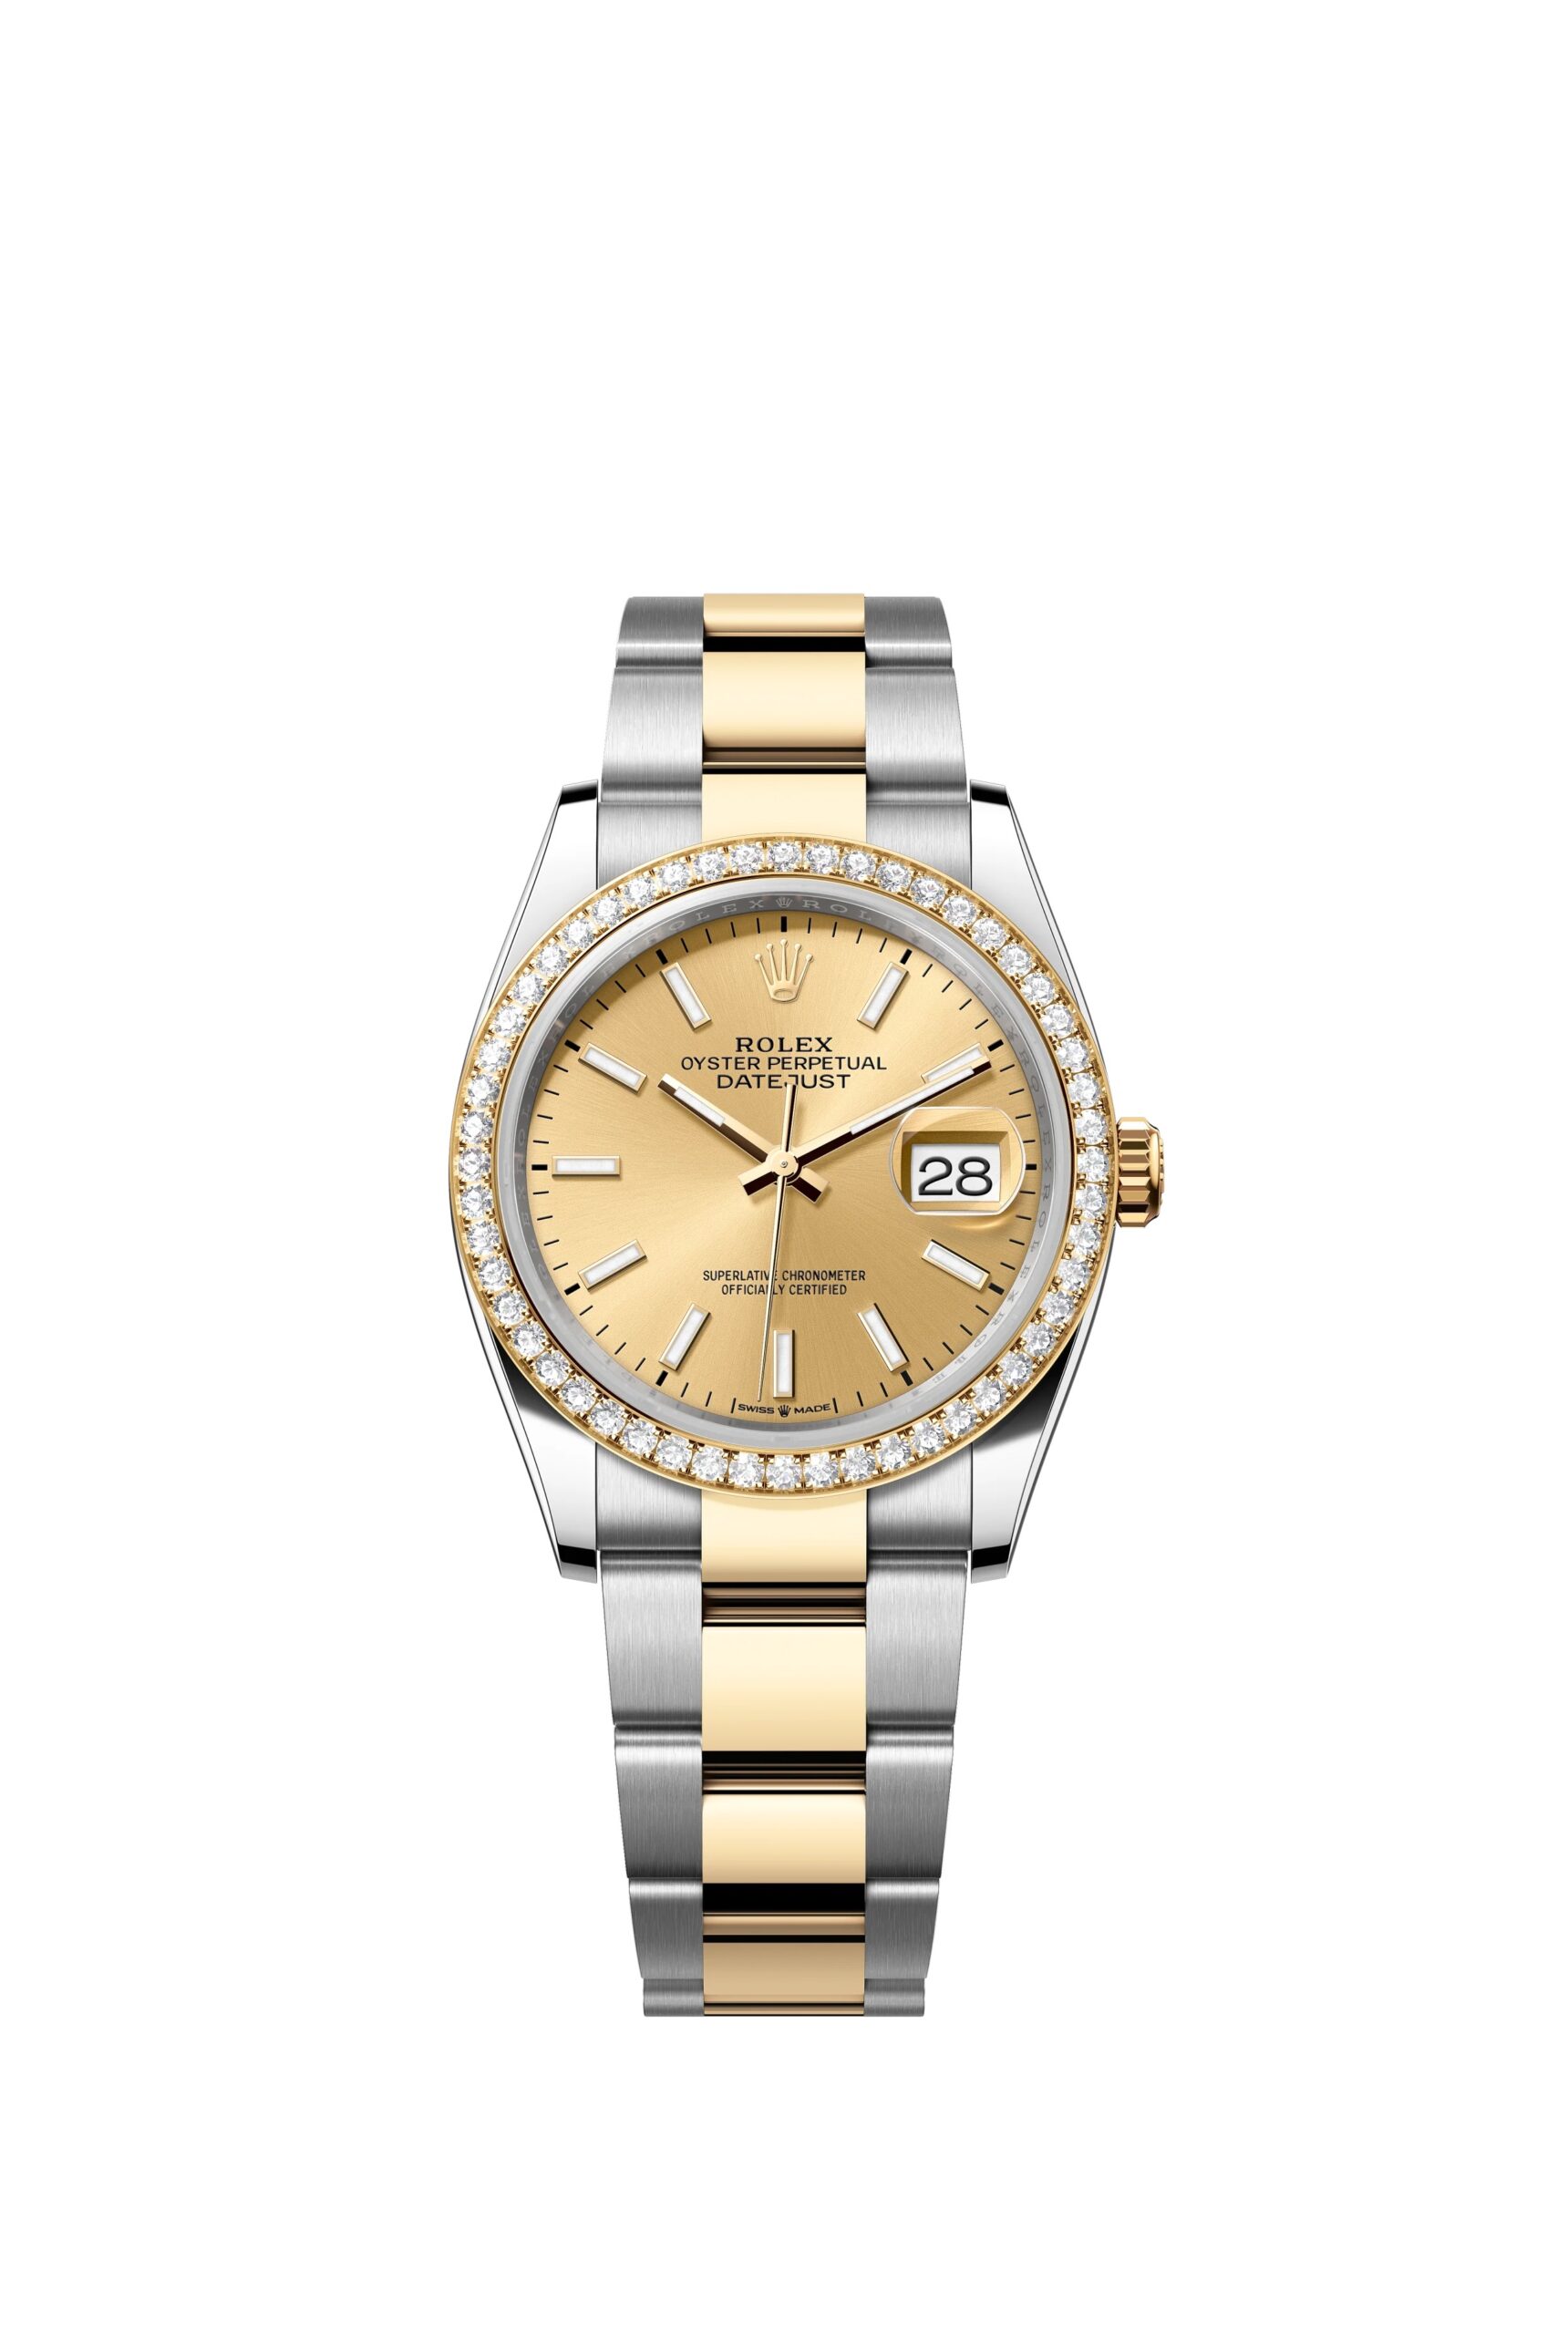 Rolex Datejust 36 Oyster, 36 mm, Oystersteel, yellow gold ard diamonds Reference 126283RBR